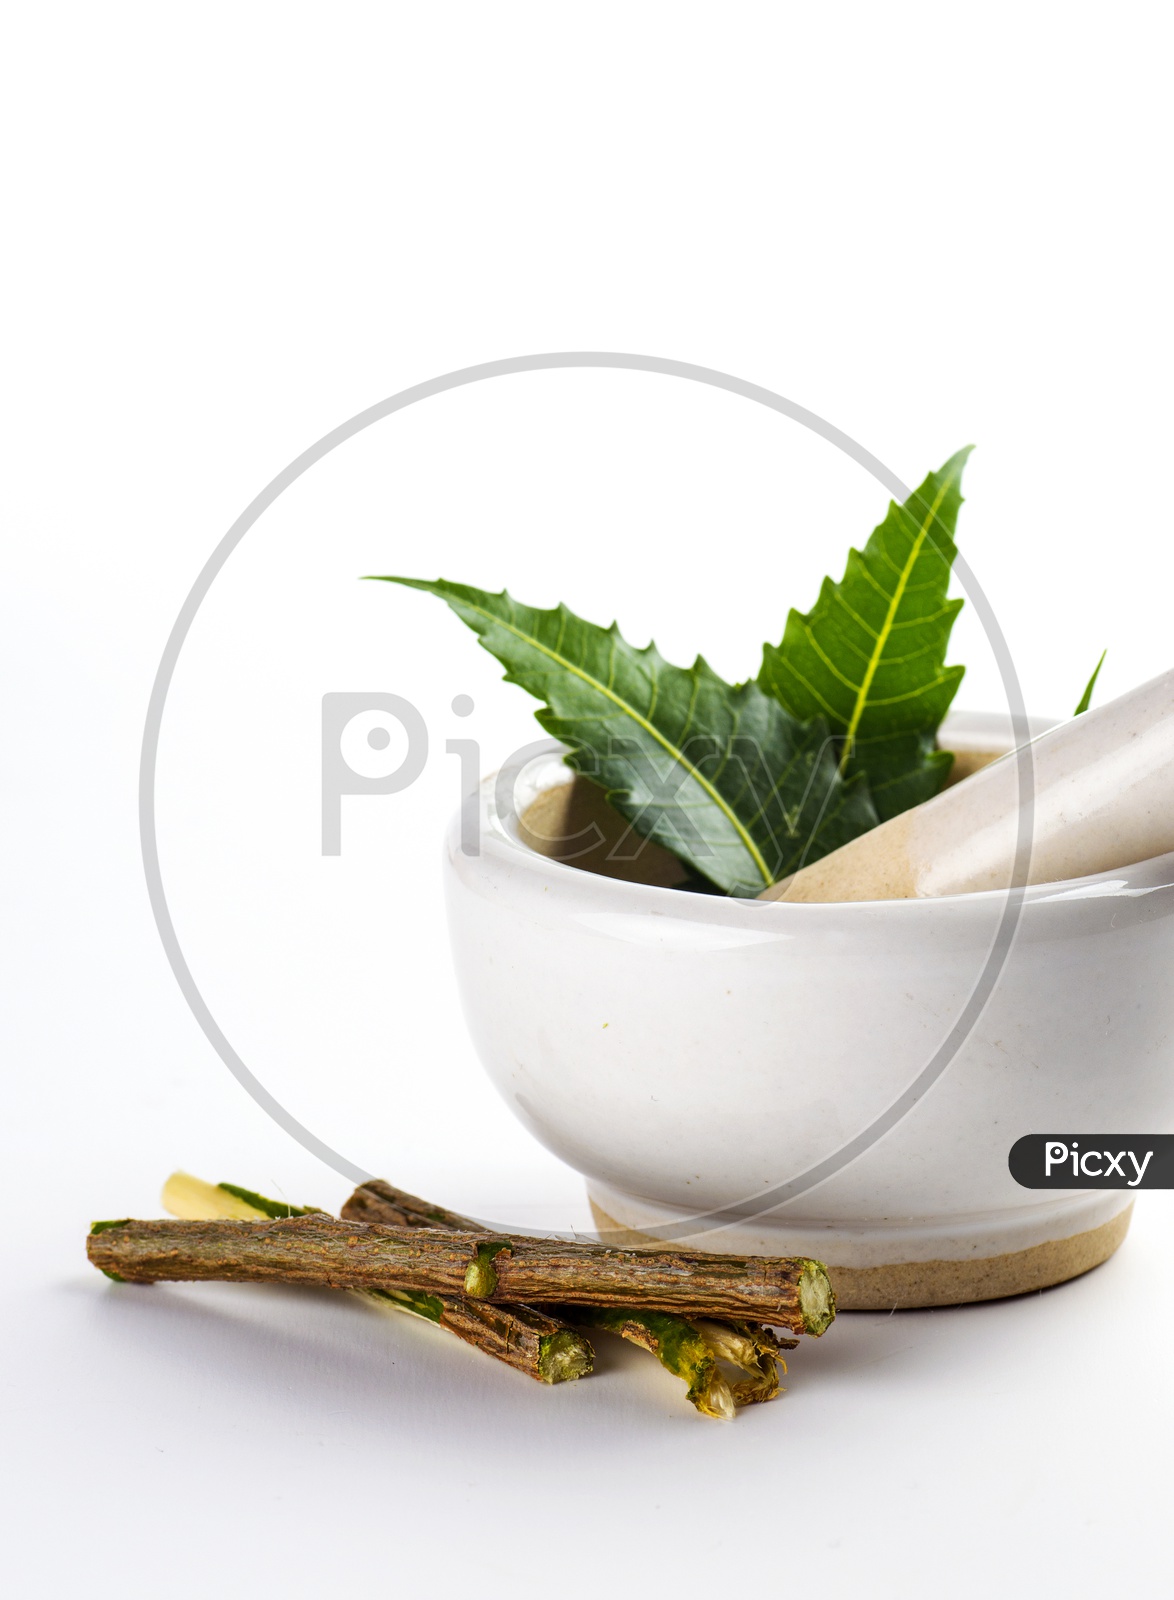 Mortar and pestle with medicinal neem leaves on white background